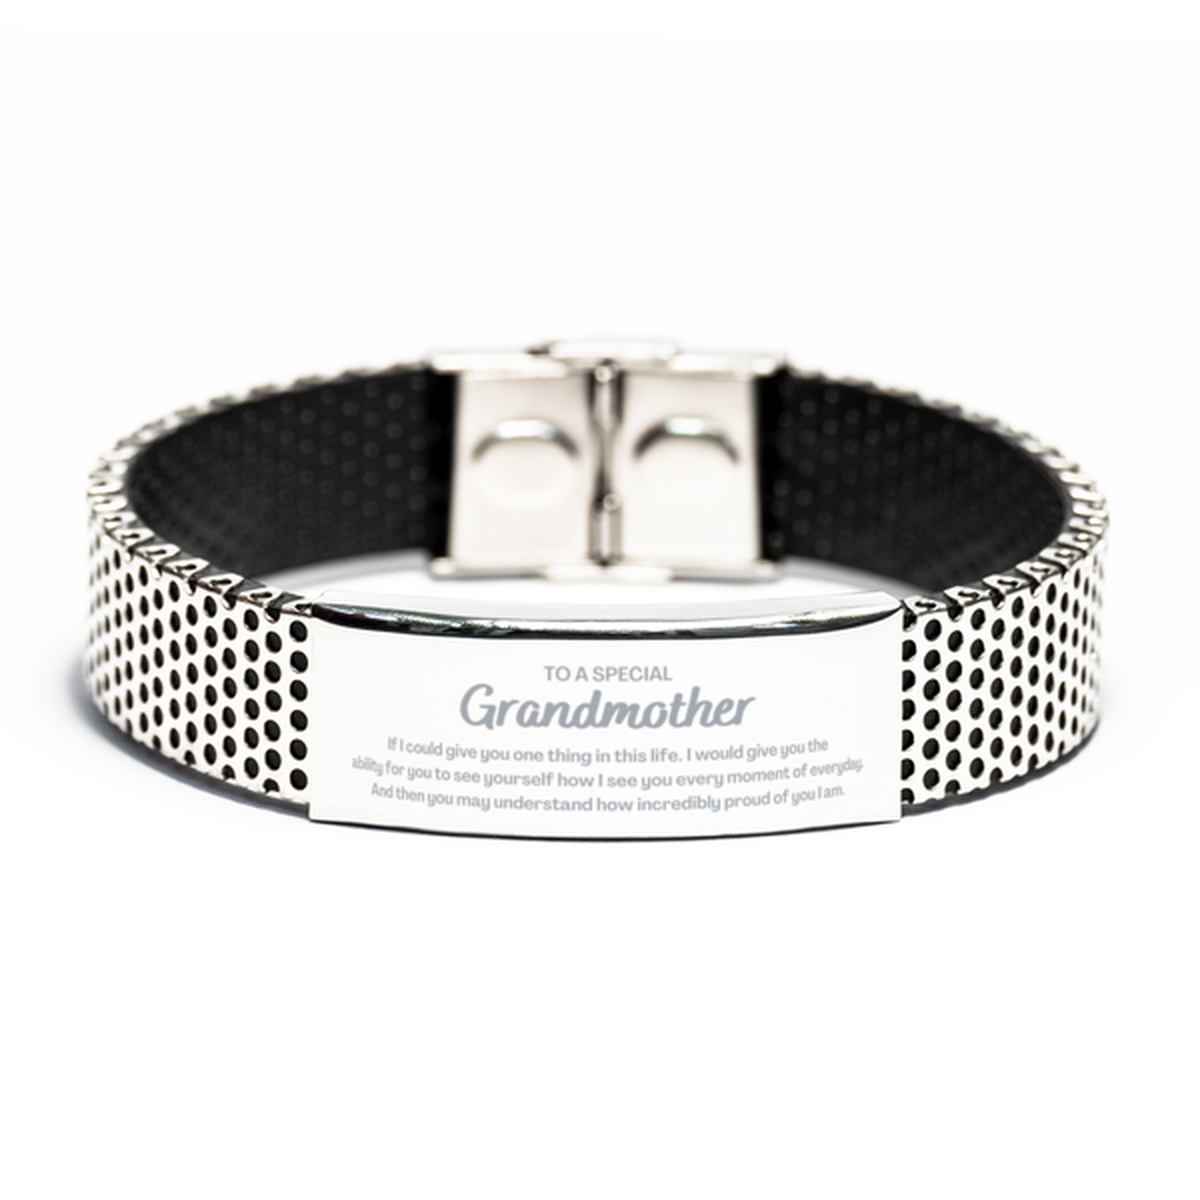 To My Grandmother Stainless Steel Bracelet, Gifts For Grandmother Engraved, Inspirational Gifts for Christmas Birthday, Epic Gifts for Grandmother To A Special Grandmother how incredibly proud of you I am